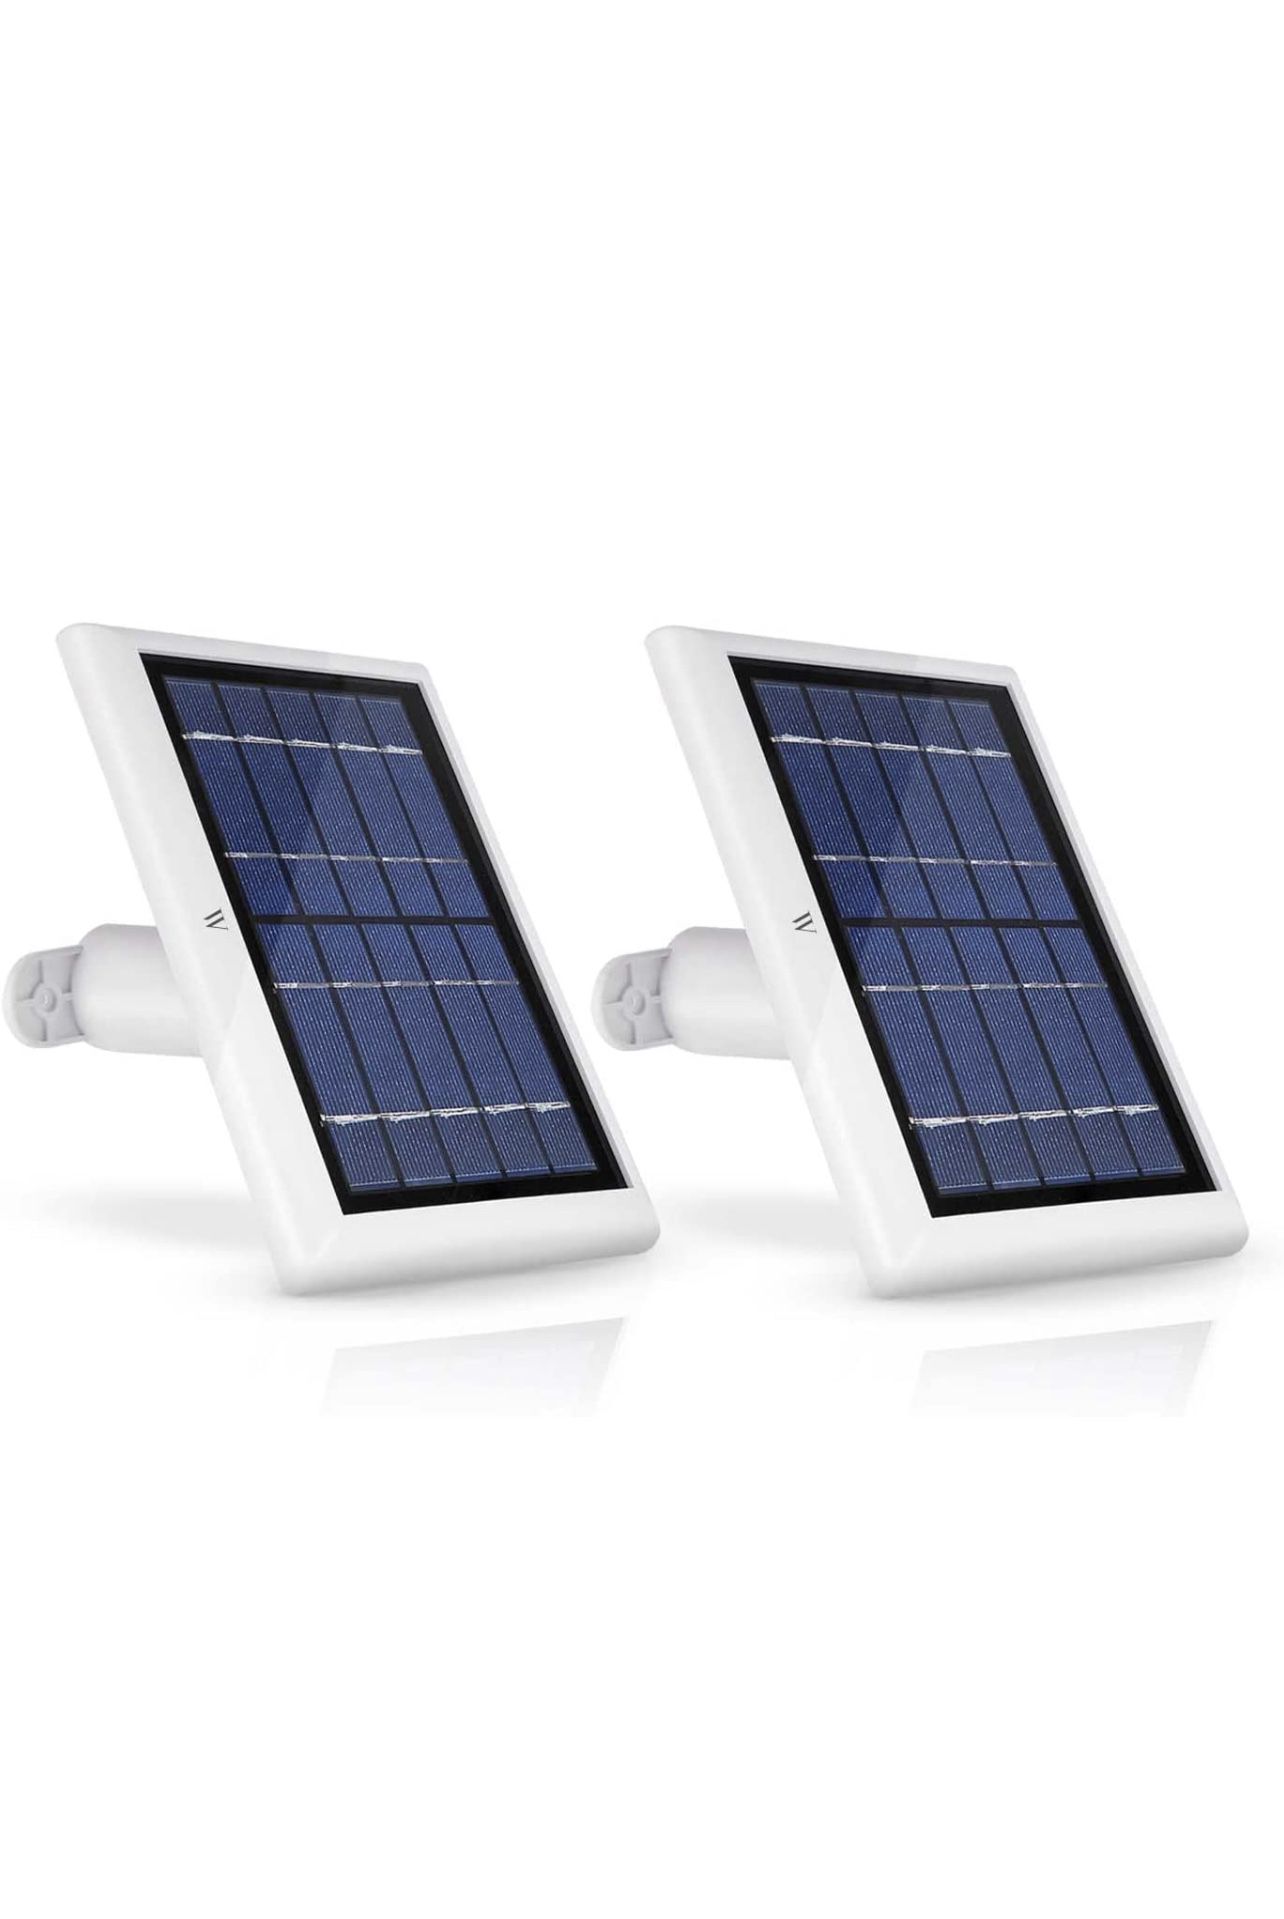 Wasserstein Solar Panel Compatible with Ring Spotlight Cam